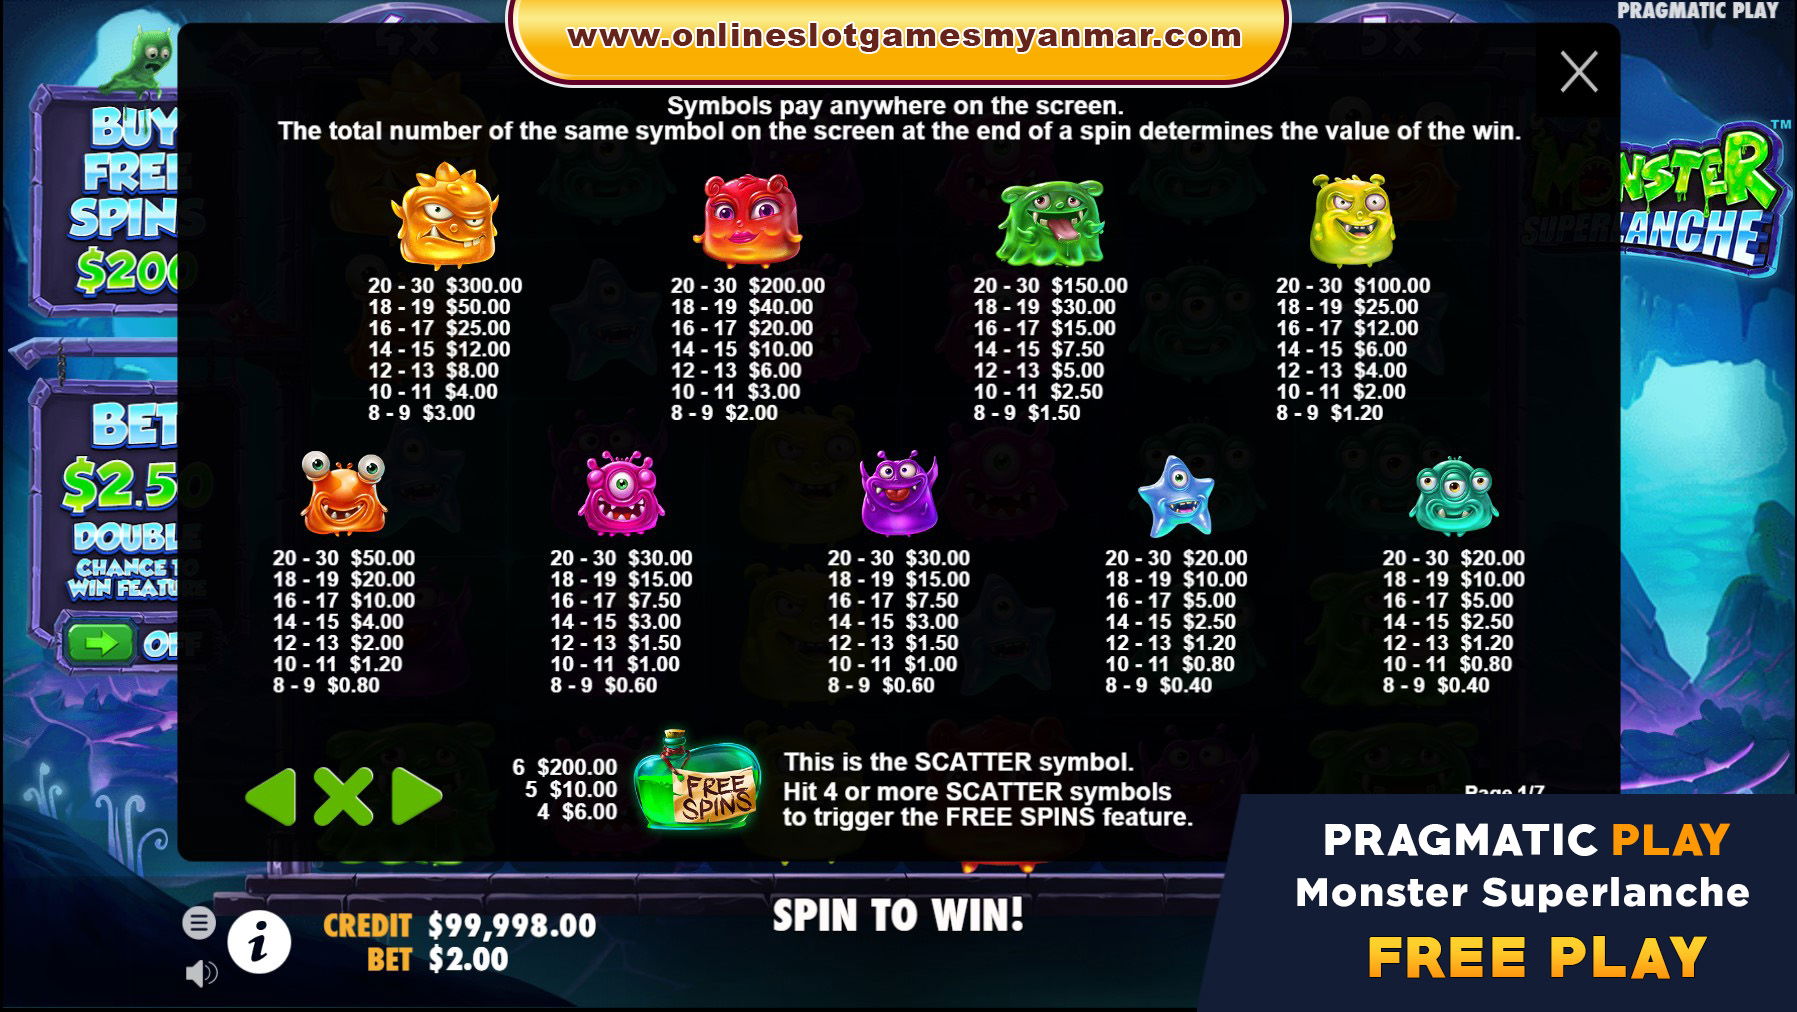 Pragmatic Play Slot Game - Monster Superlanche Game payout